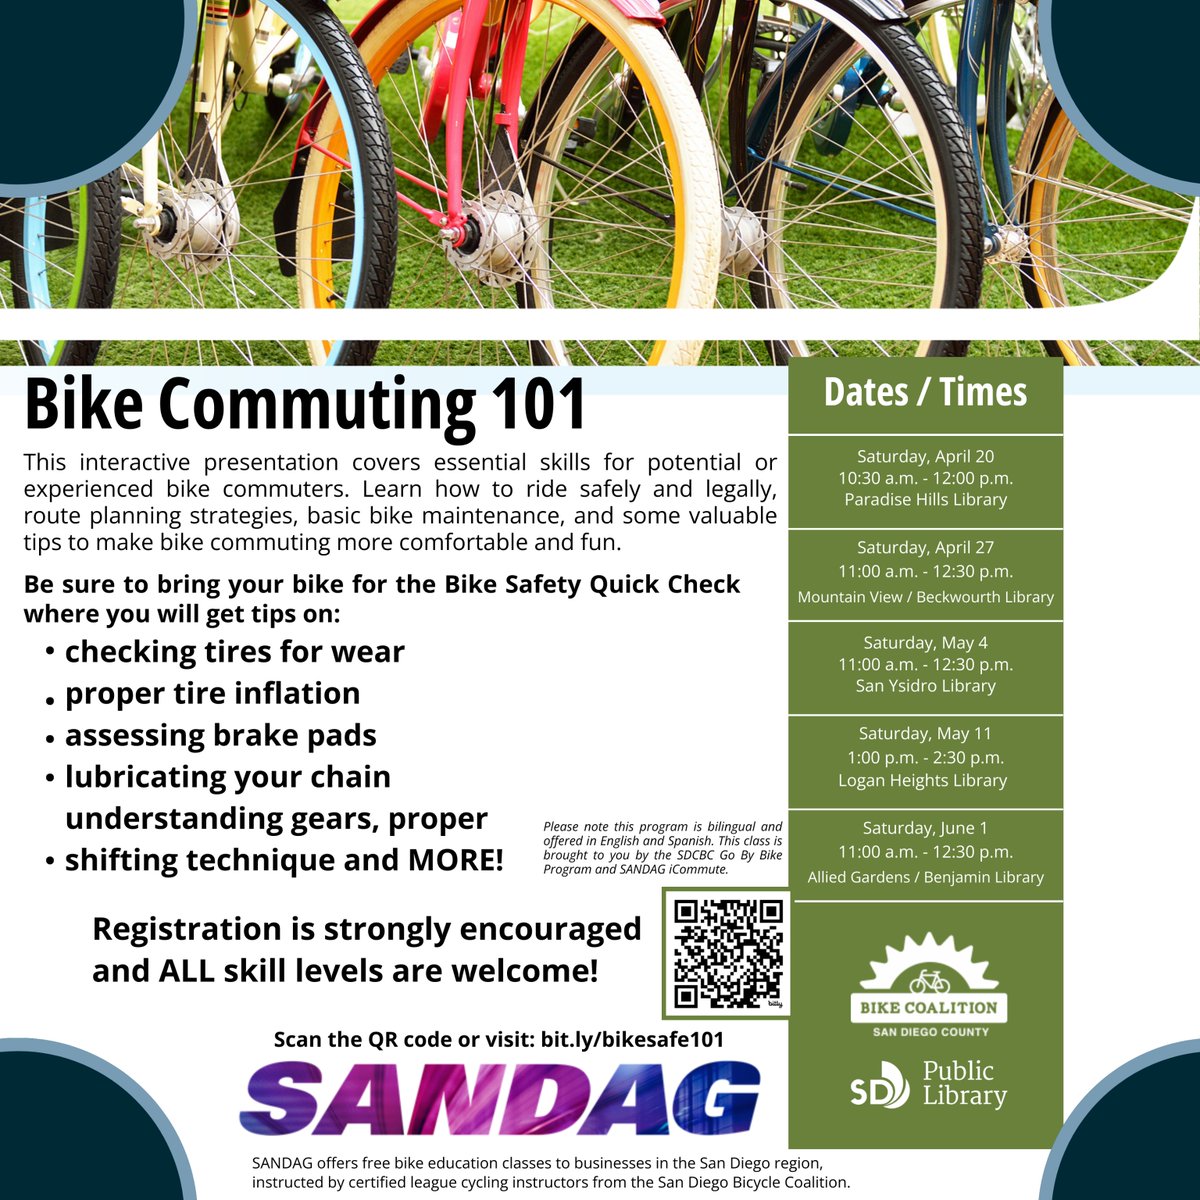 Bike Commuting 101 Join SBCS and SANDAG with this interactive presentation that covers essential skills for potential or experienced bike commuters. Learn how to ride safely to make bike commuting more comfortable and fun.